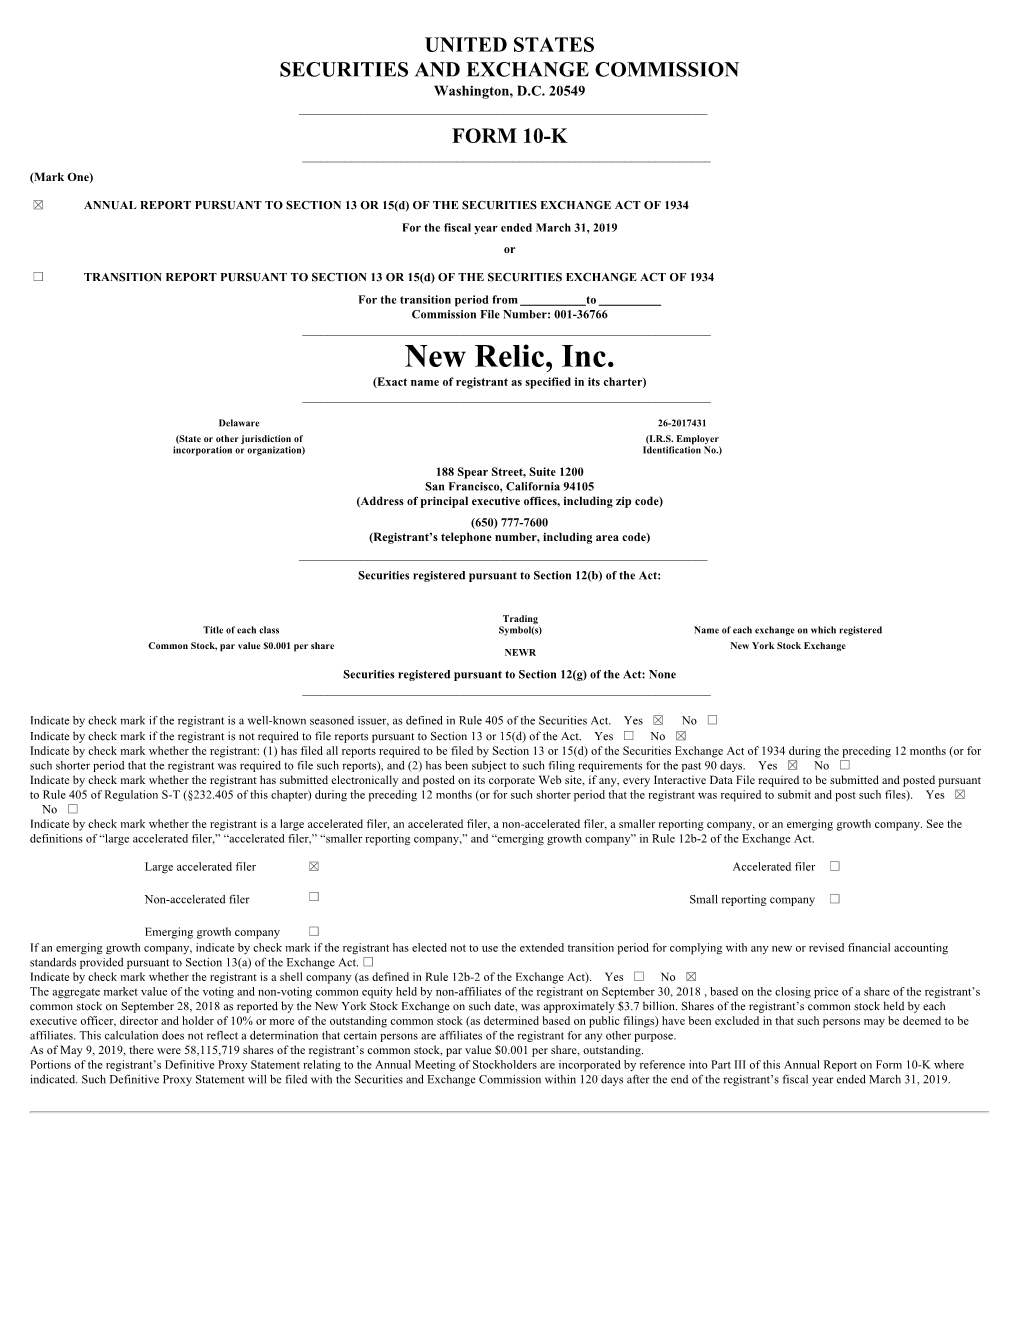 New Relic, Inc. (Exact Name of Registrant As Specified in Its Charter) ______